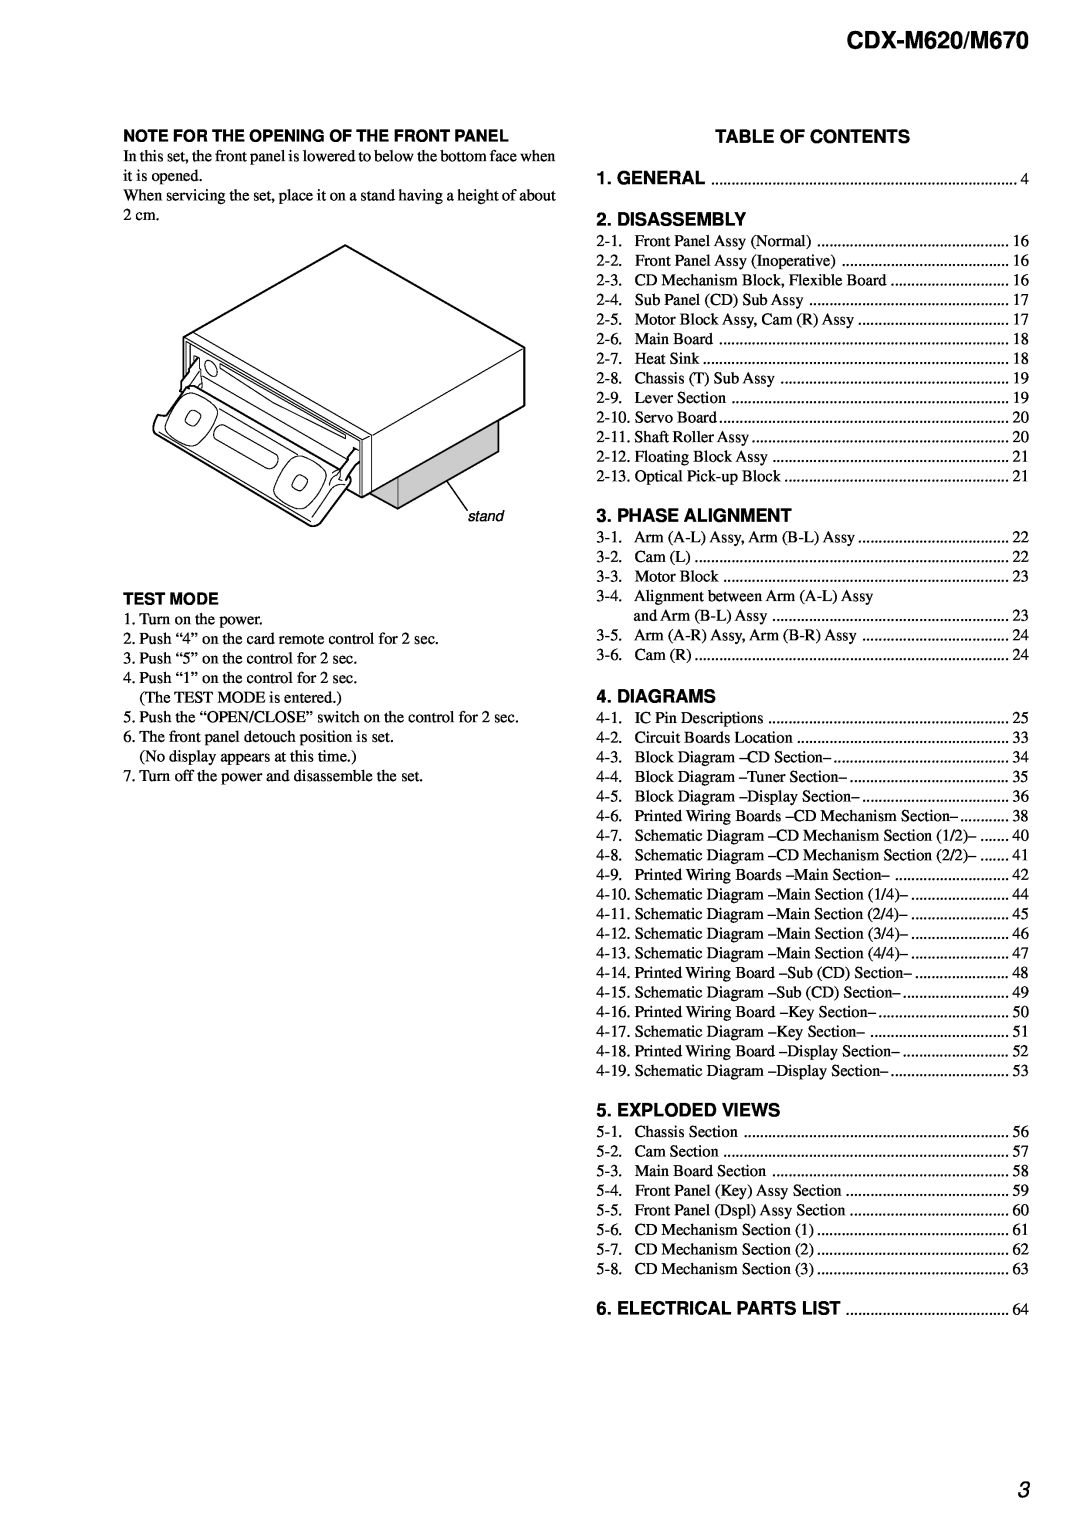 Sony Ericsson service manual Table Of Contents, Disassembly, Phase Alignment, Diagrams, Exploded Views, CDX-M620/M670 